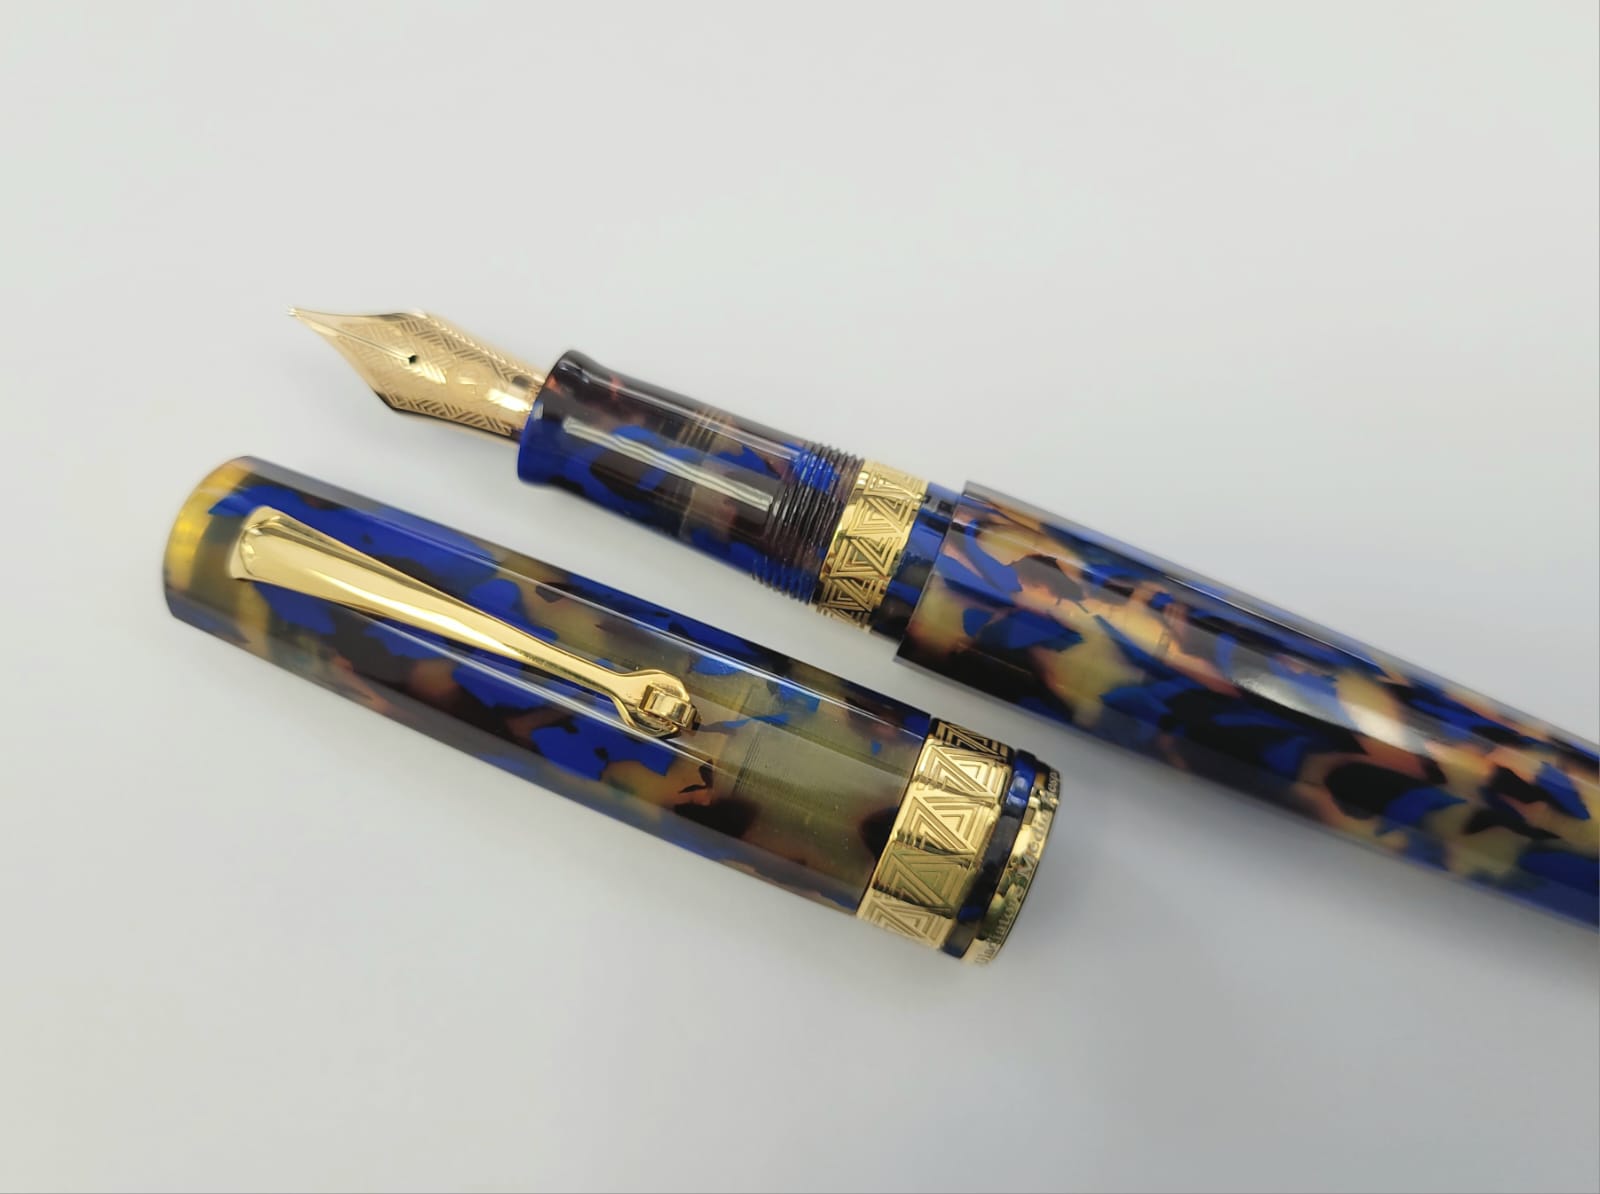 NEW! ASC Gladiatore Medio Bespoke Blue Lucens Celluloid - Limited Edition of 23 Pens